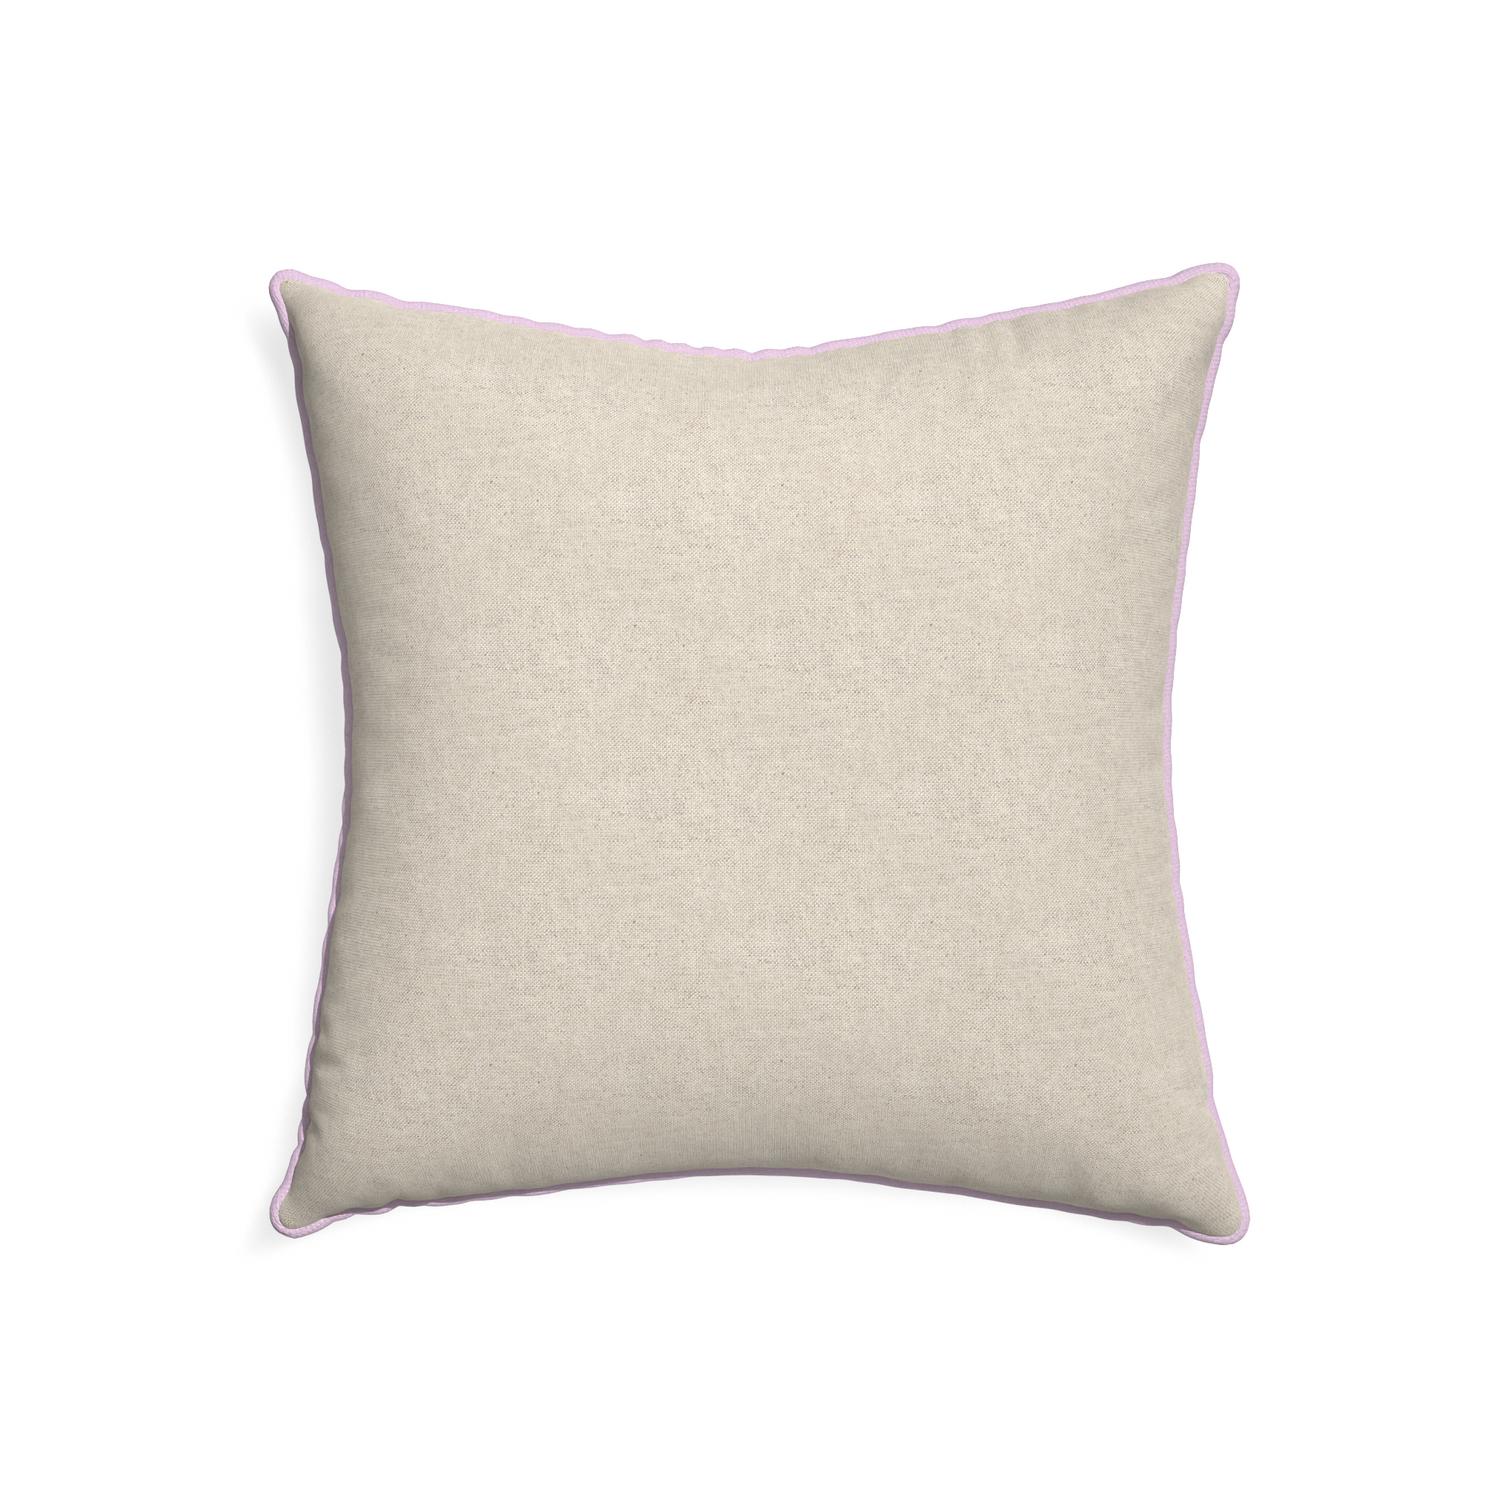 22-square oat custom pillow with l piping on white background